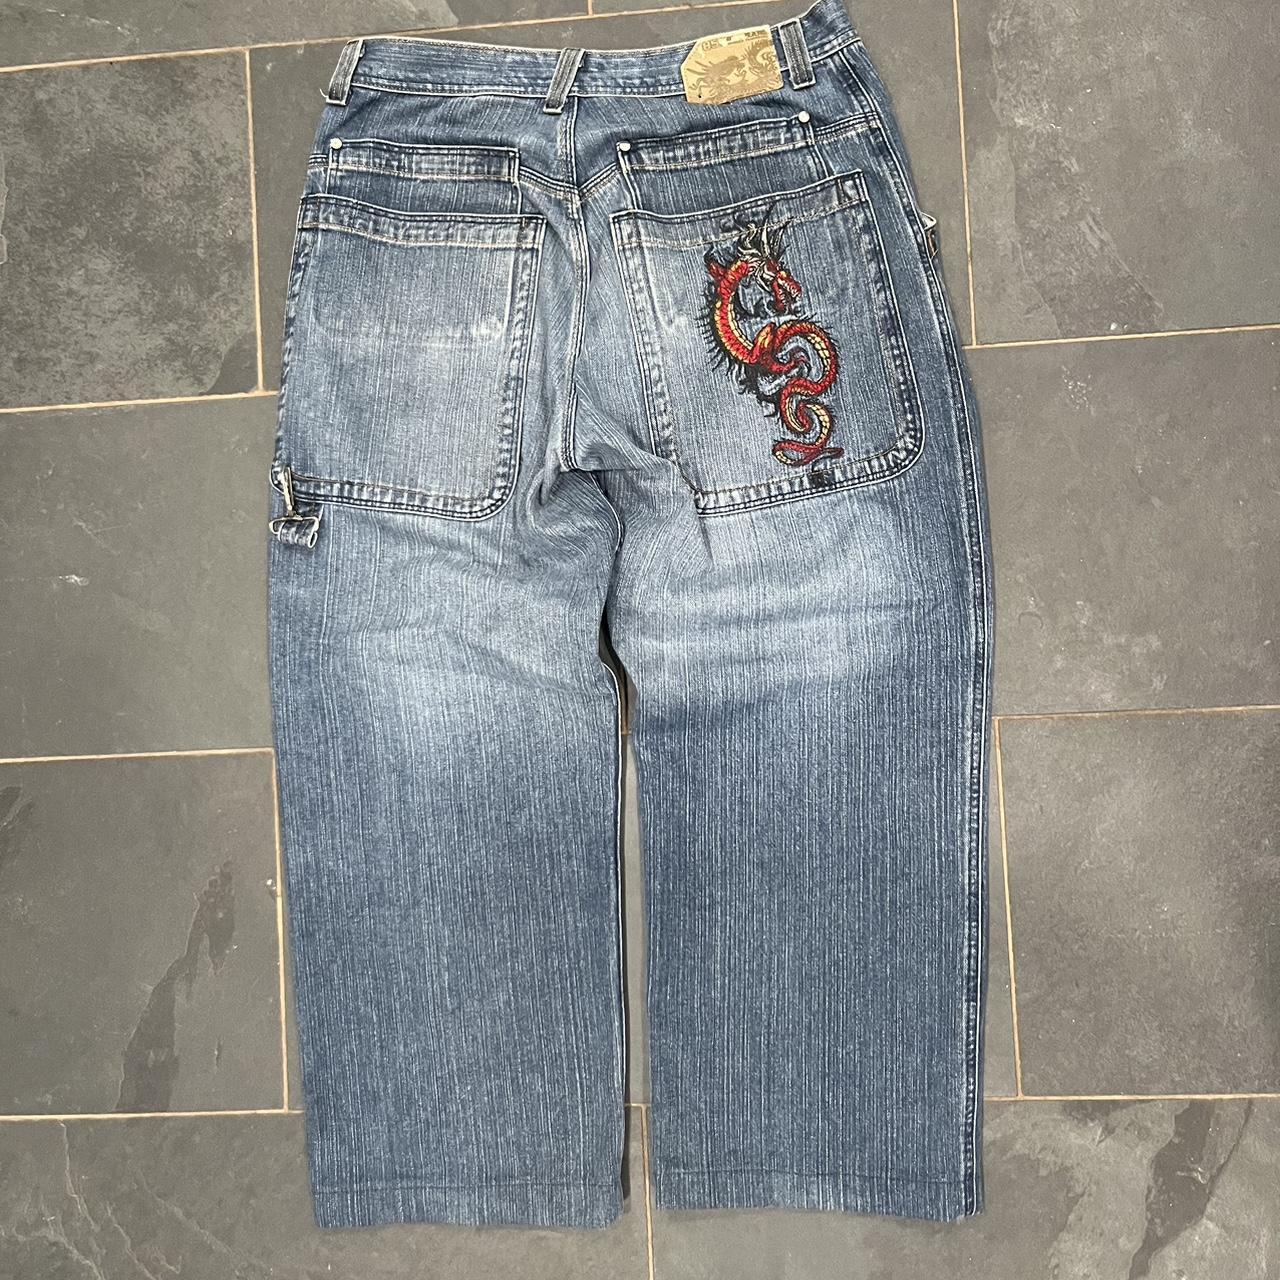 JNCO Men's Red and Navy Jeans | Depop